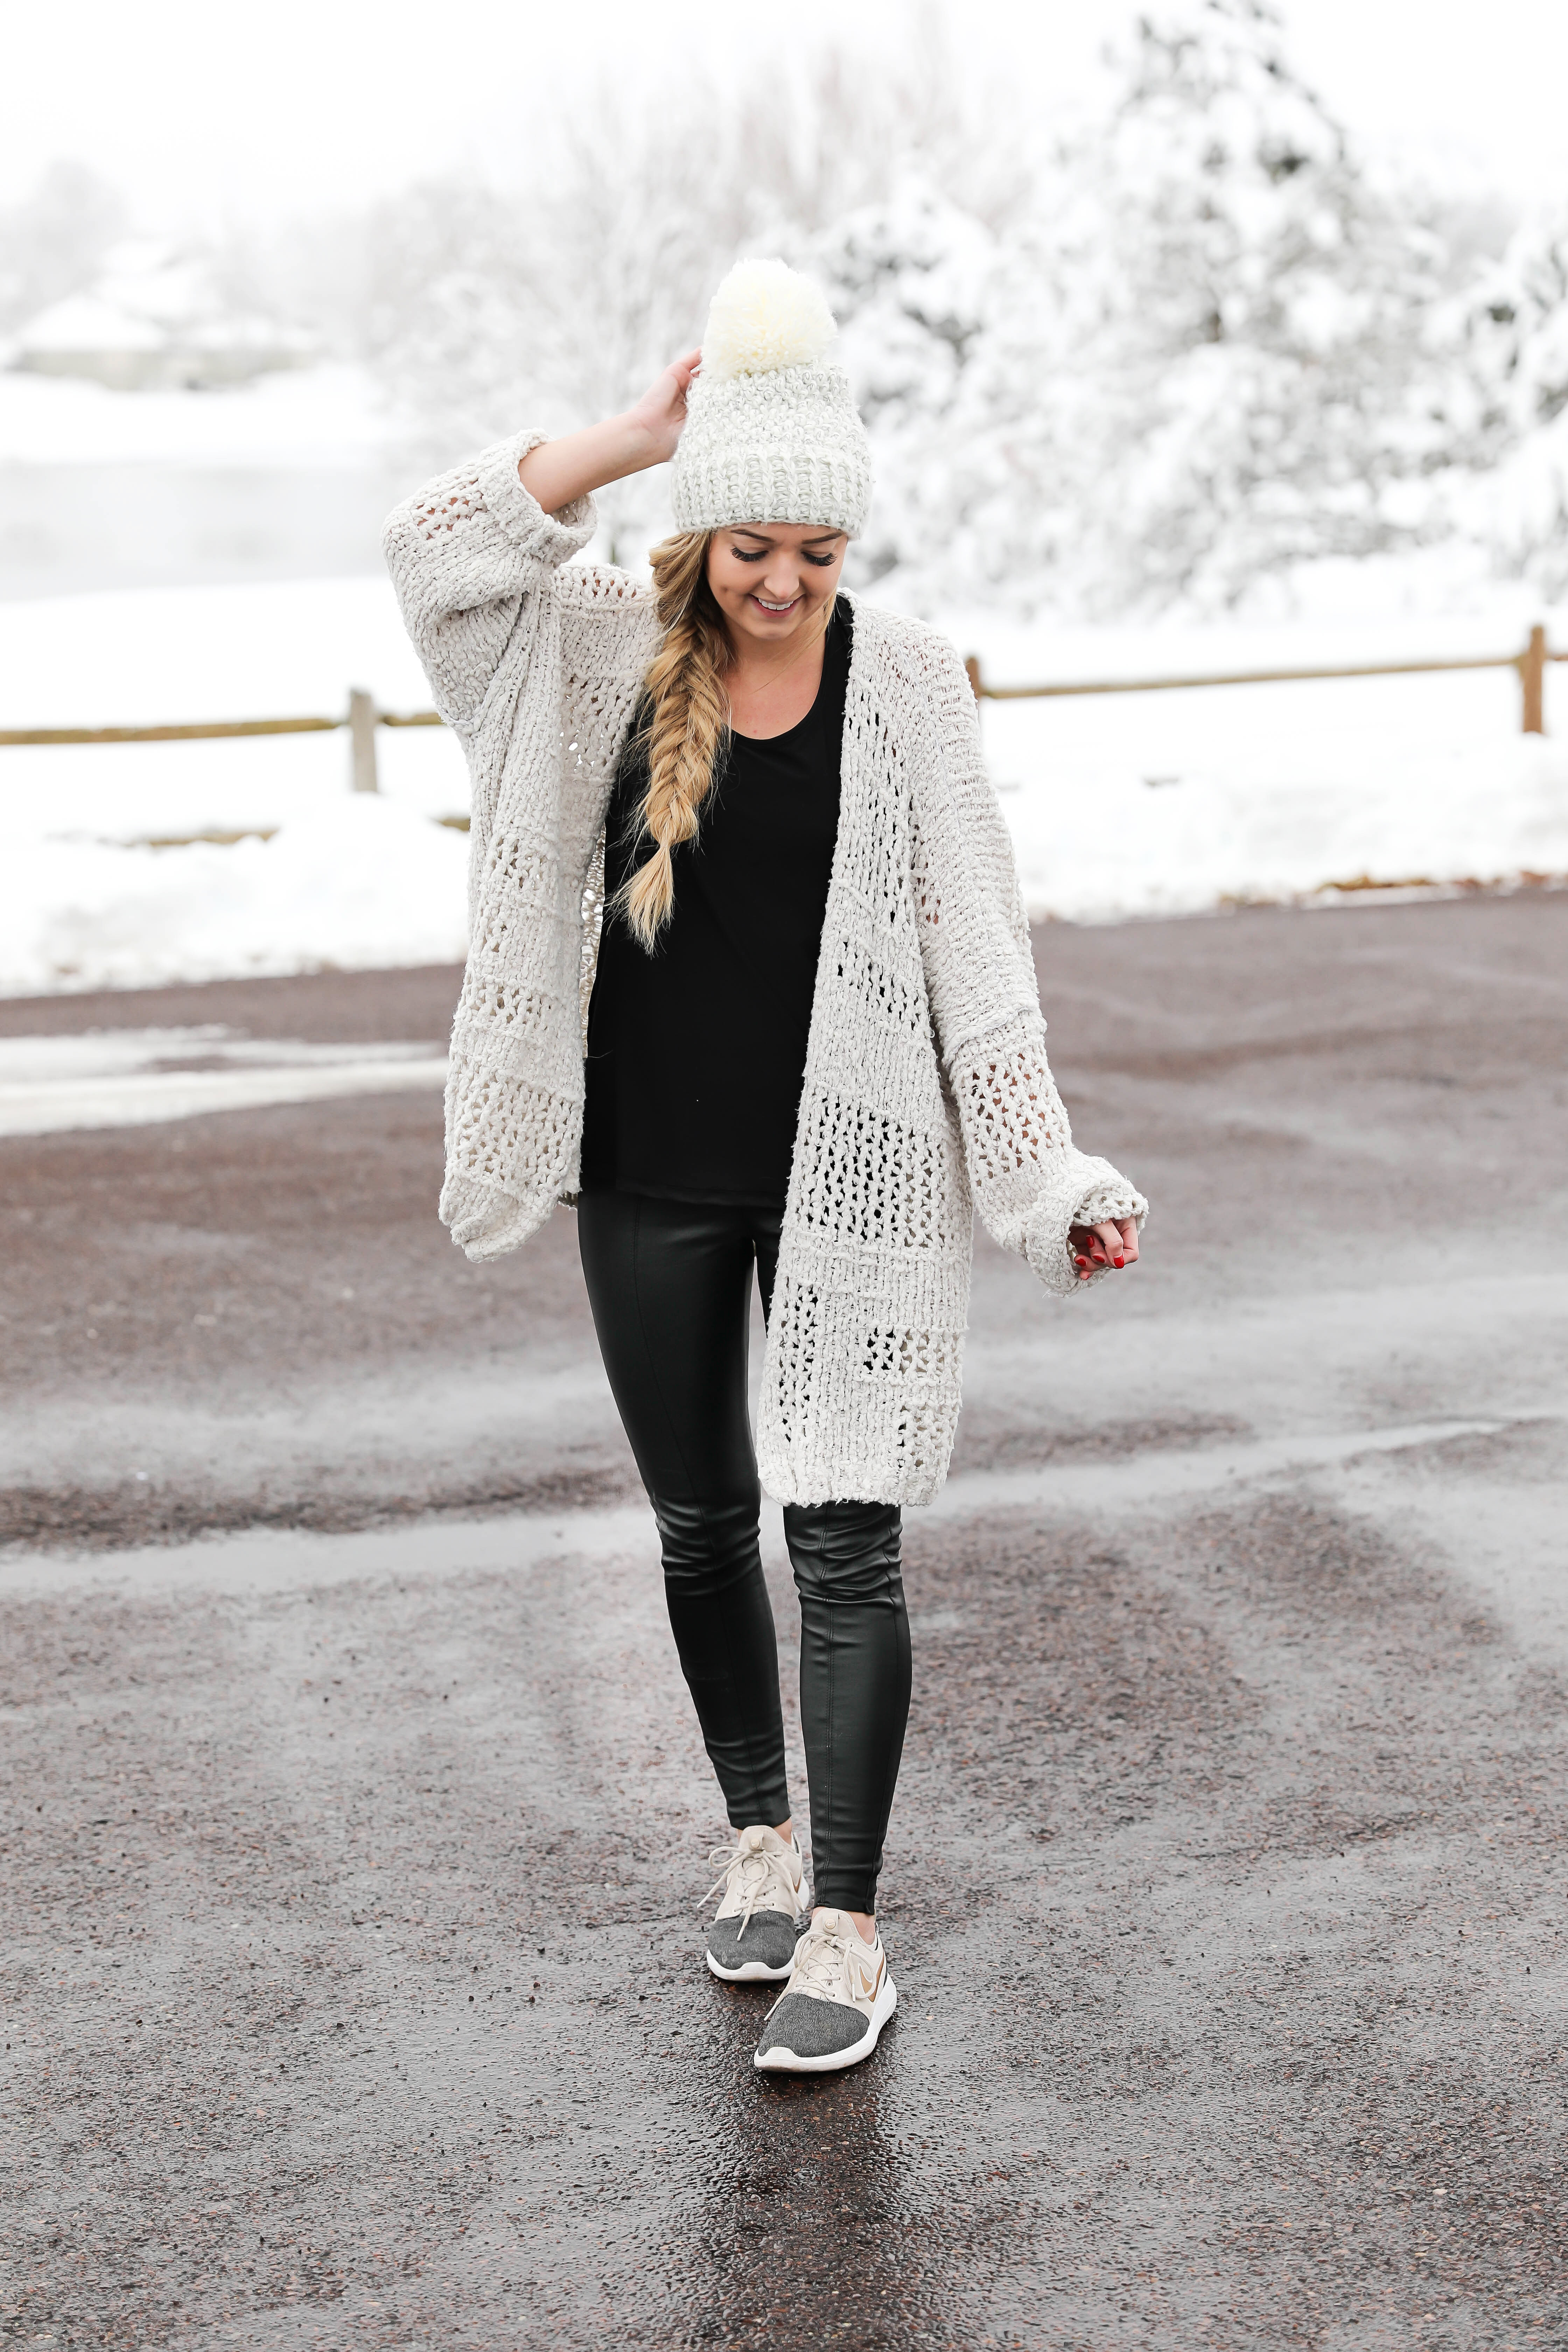 The best faux leather leggings! Comparing three different brands of faux leather pants including spanx, topshop, and target! Cute ideas for causal winter outfits and how to style leather pants! Details on fashion blog daily dose of charm by lauren lindmark